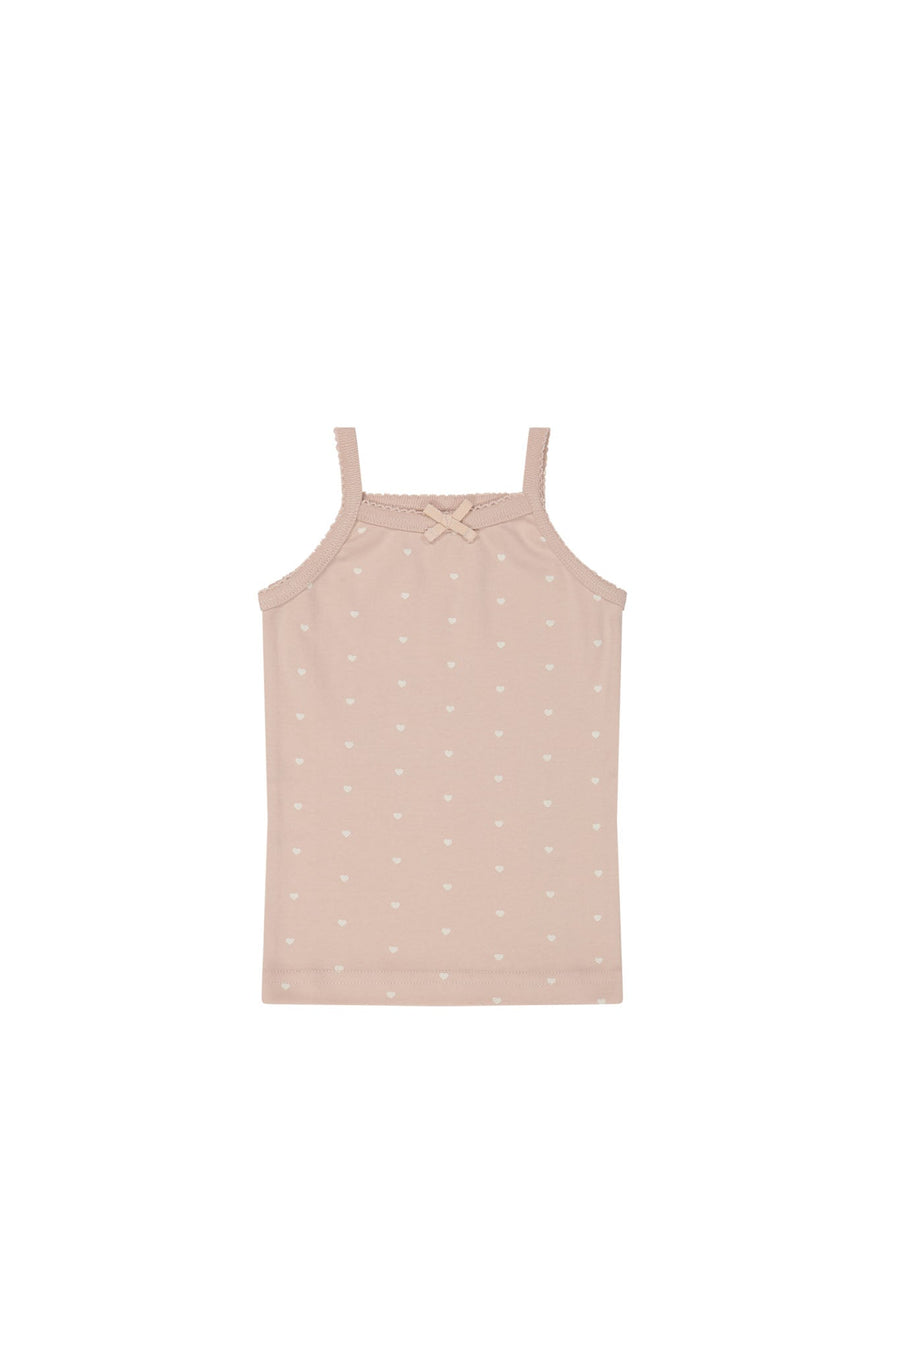 Organic Cotton Singlet - Mon Amour Rose Childrens Singlet from Jamie Kay NZ